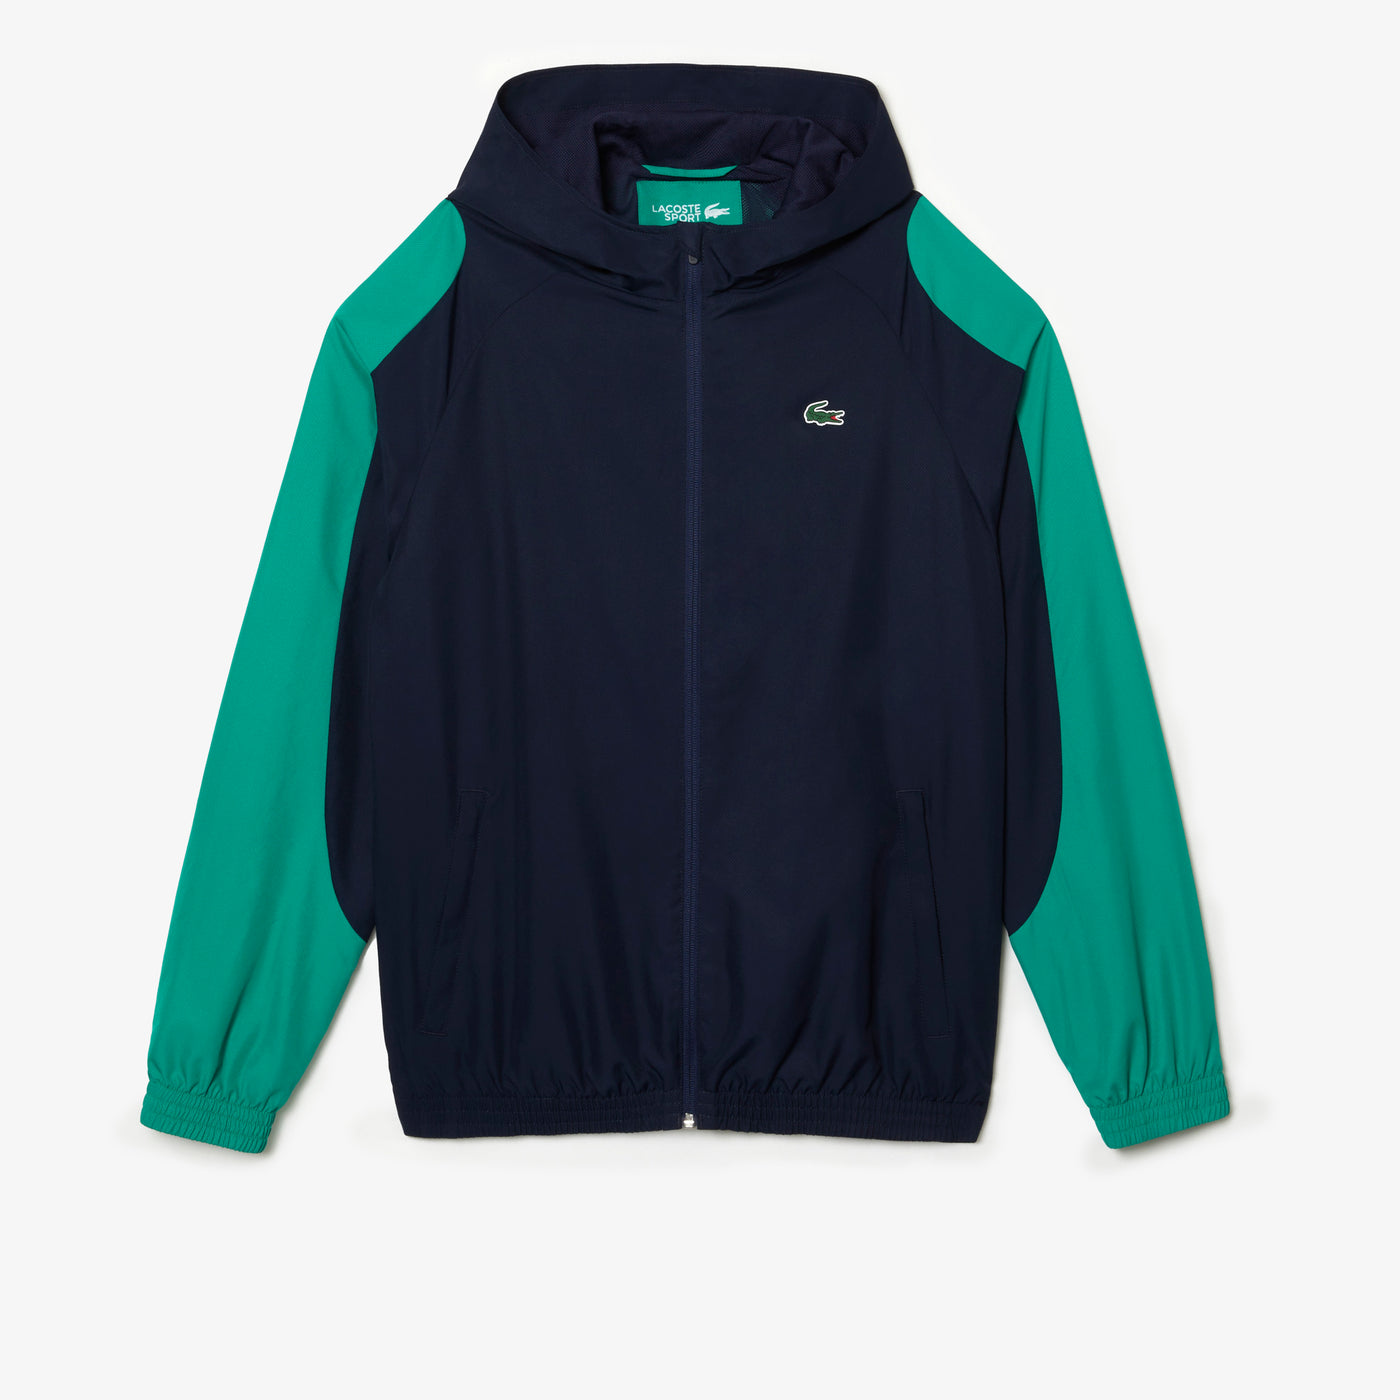 Shop The Latest Collection Of Lacoste Men'S Lacoste Sport Colour-Block Tennis Jacket - Bh9272 In Lebanon